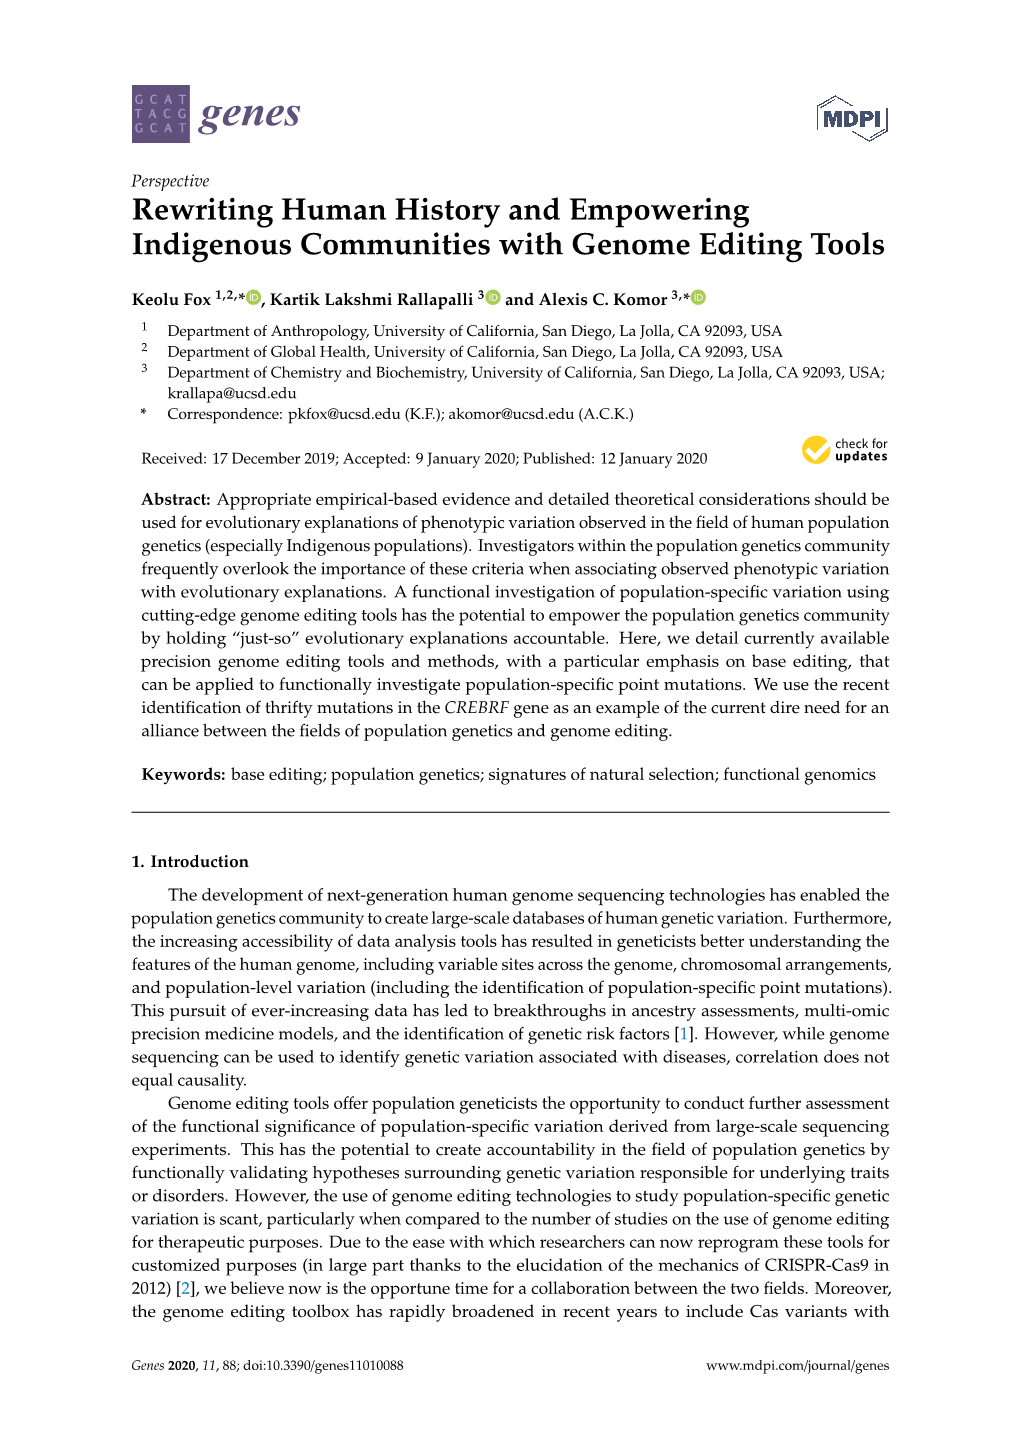 Rewriting Human History and Empowering Indigenous Communities with Genome Editing Tools